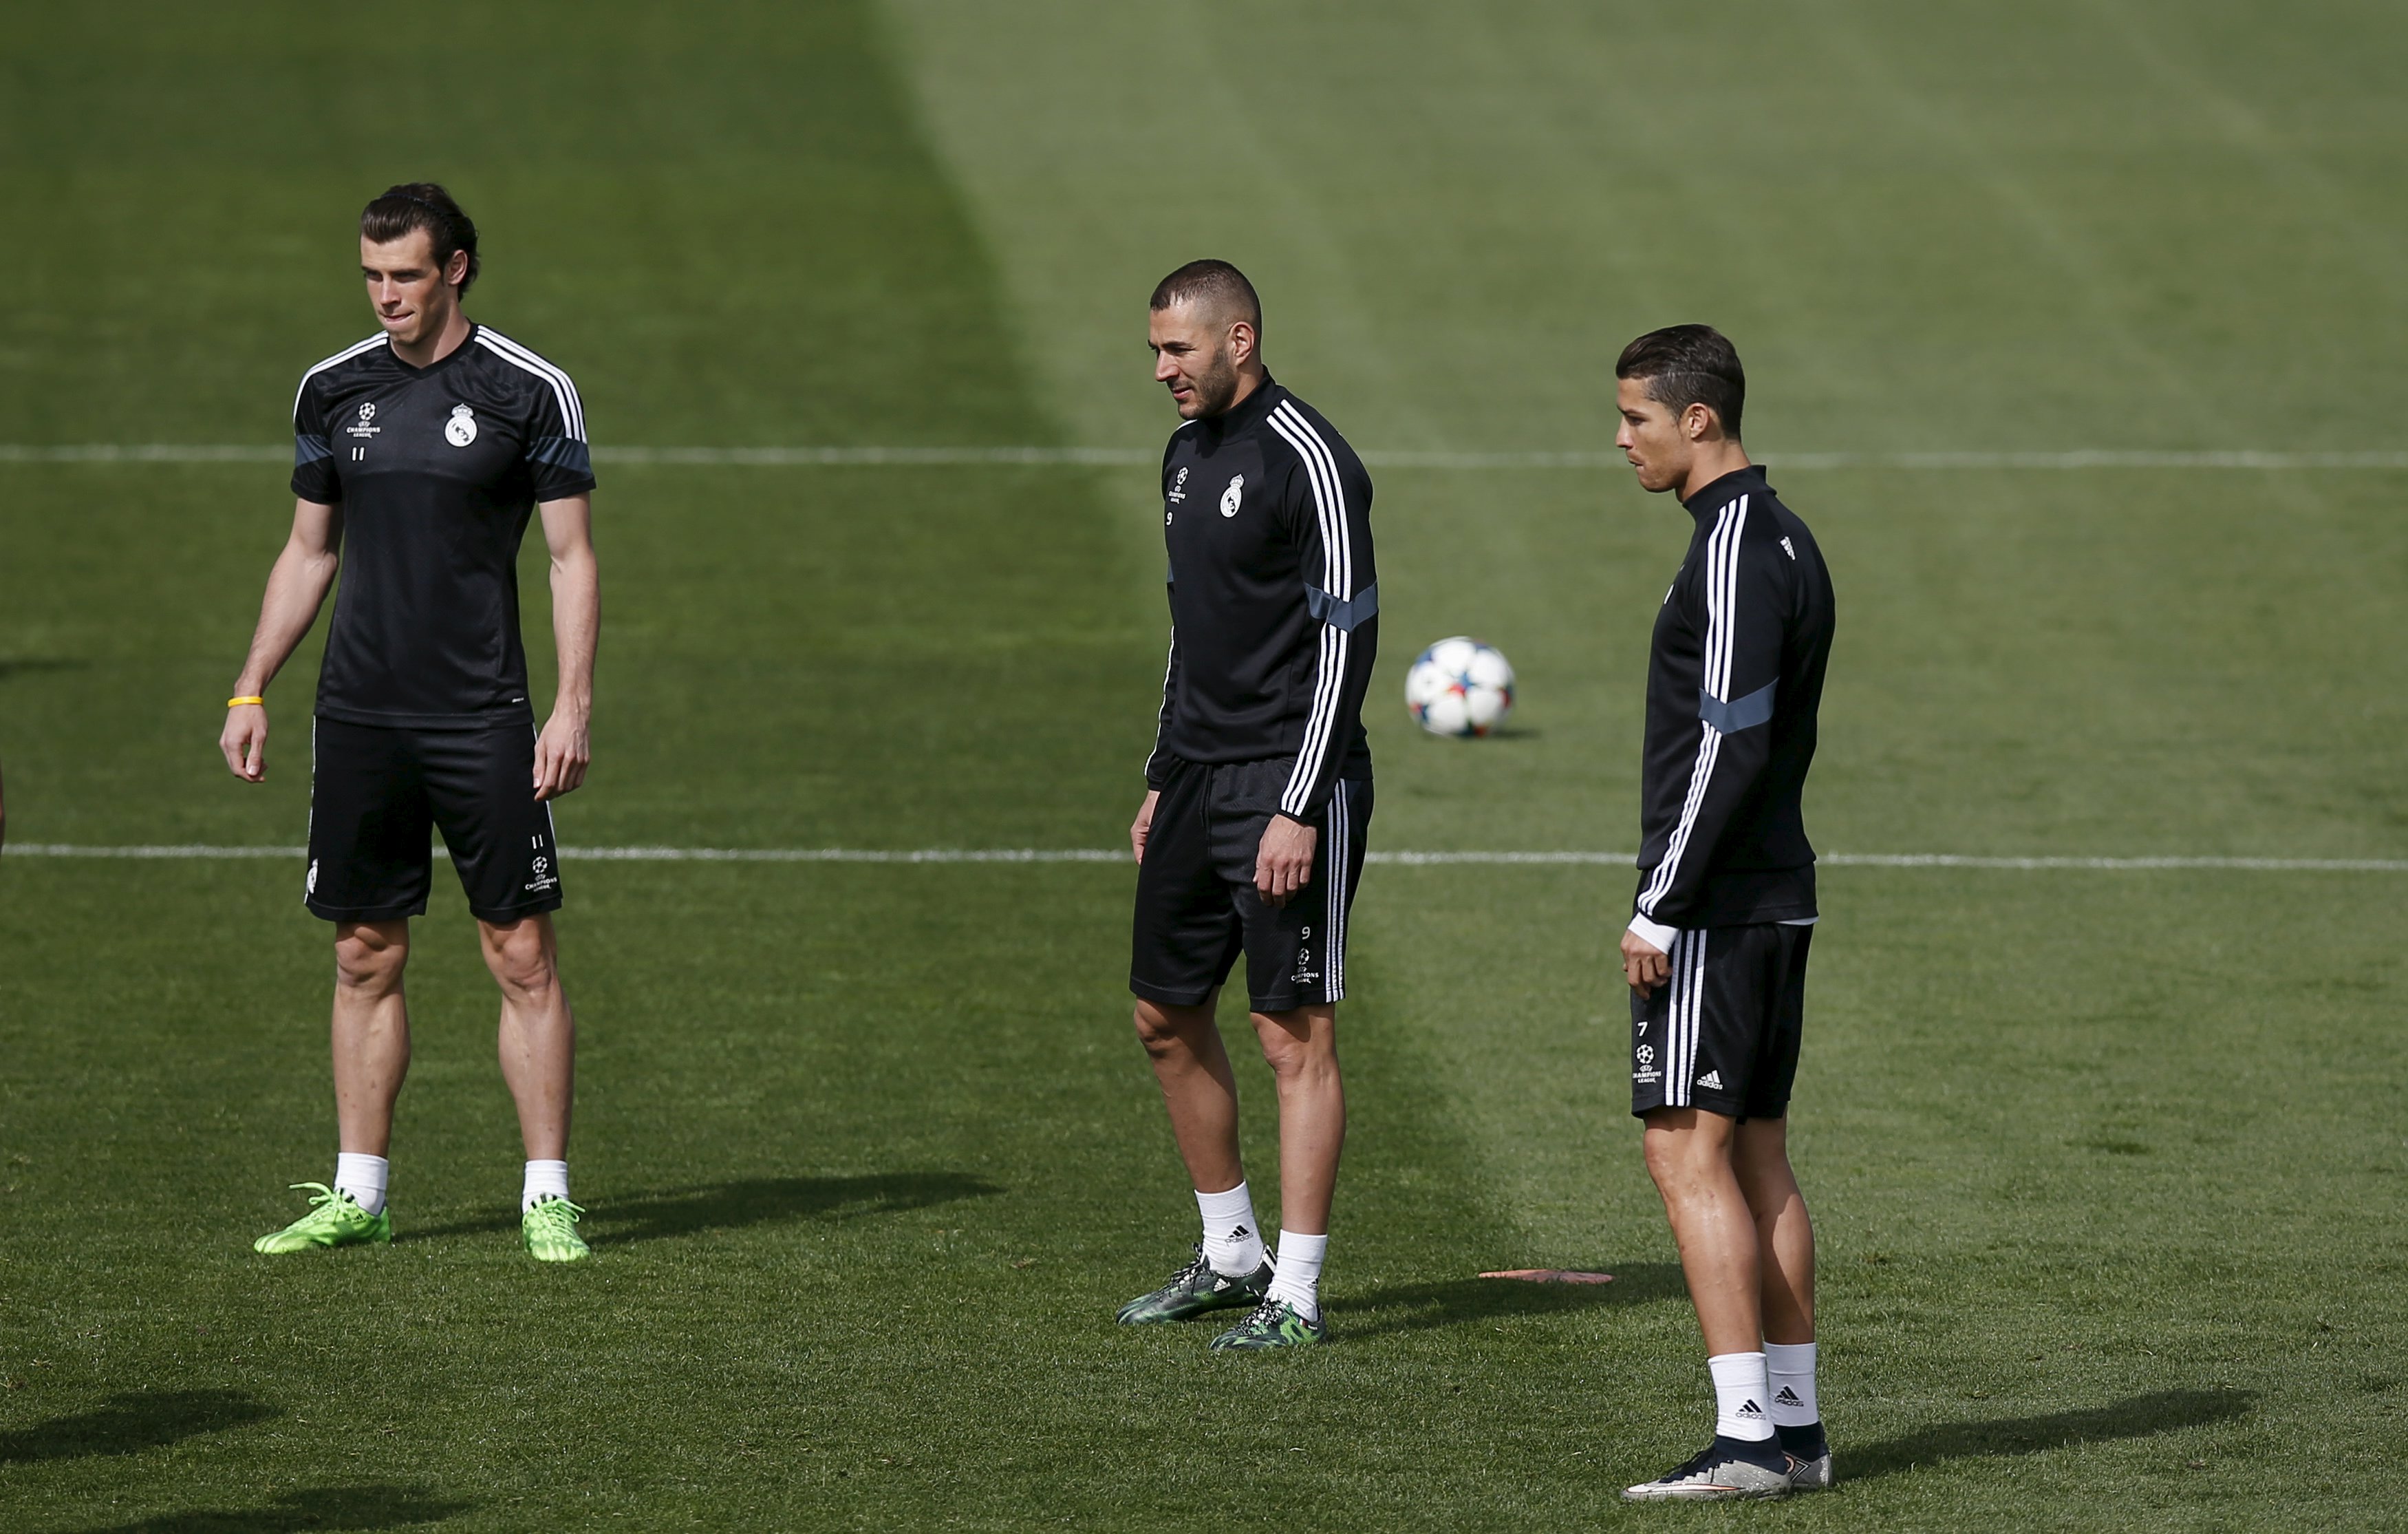 (L-R) Real Madrid's Gareth Bale, Karim Benzema and Cristiano Ronaldo attend a training session at Valdebebas sports grounds in Madrid, April 13, 2015. Real Madrid will play their Champions League quarterfinal first leg soccer match against Atletico Madrid at Vicente Calderon stadium on Tuesday. REUTERS/Susana Vera